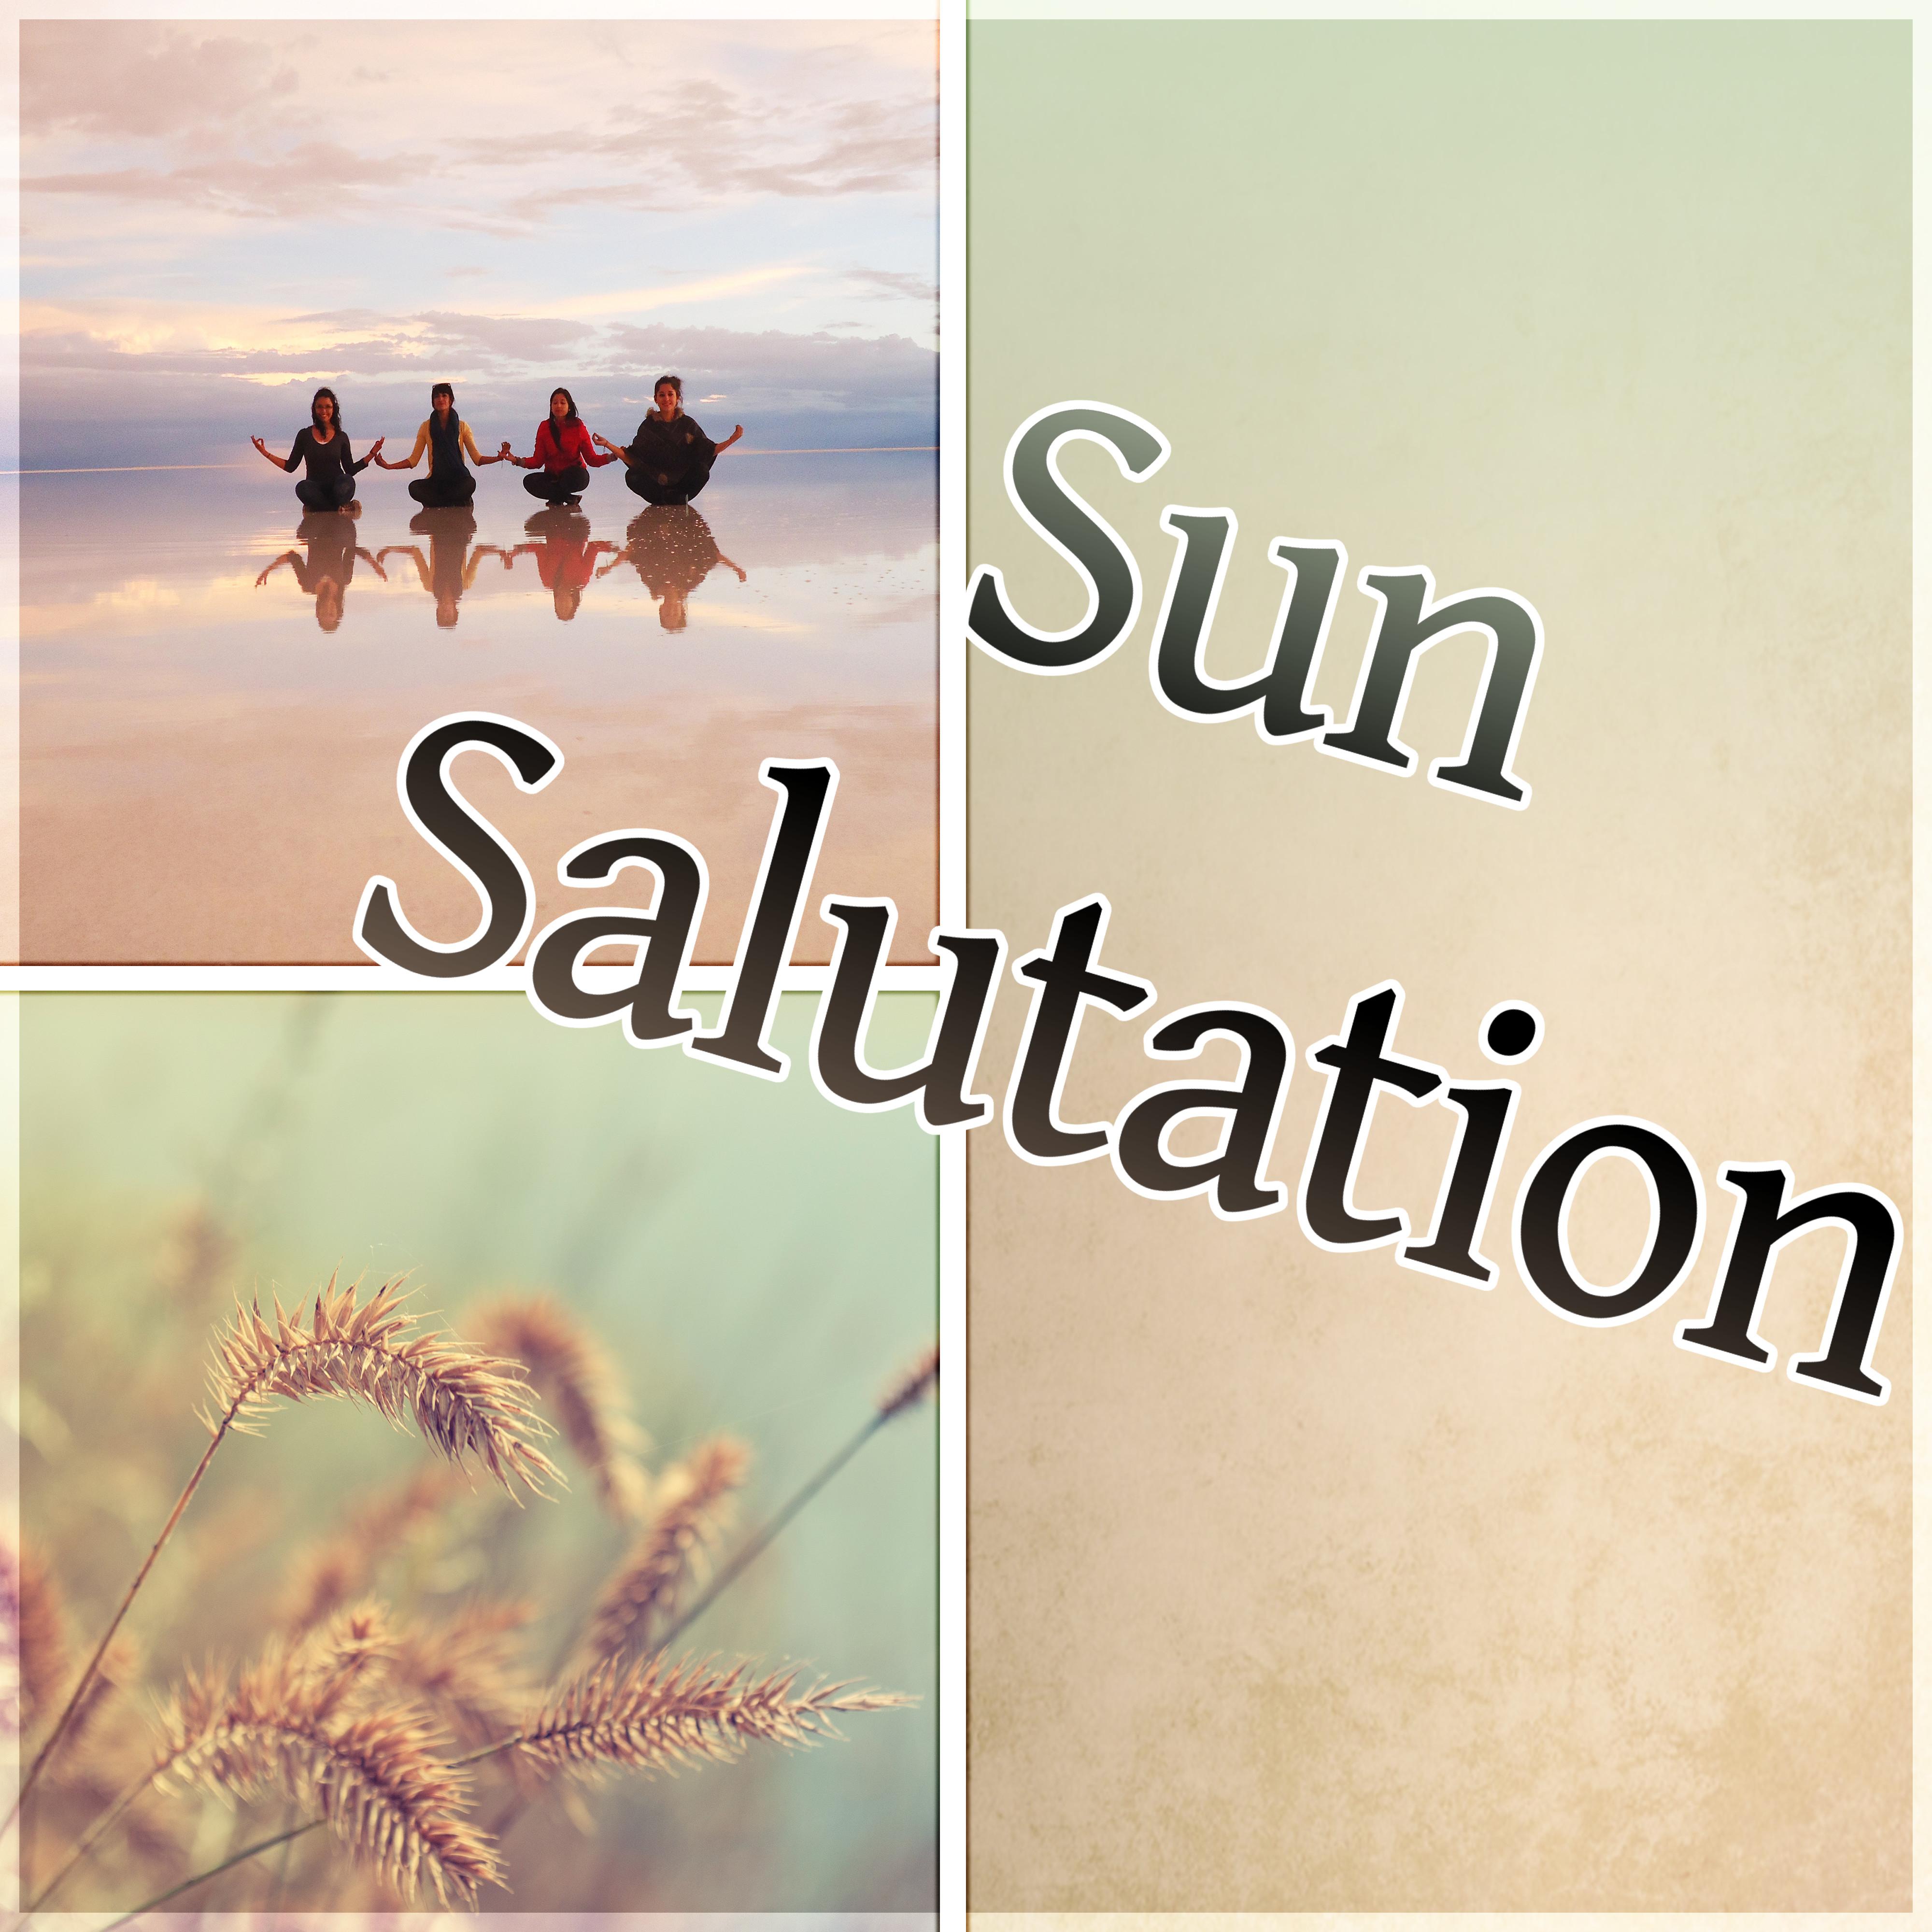 Sun Salutation – Positive Thinking with Relaxing Sounds, Sounds of Nature, Calm Background Music for Reduce Stress the Body & Mind, Wake Up, Positive Attitude to the World, Morning Coffee, Yoga, Meditation